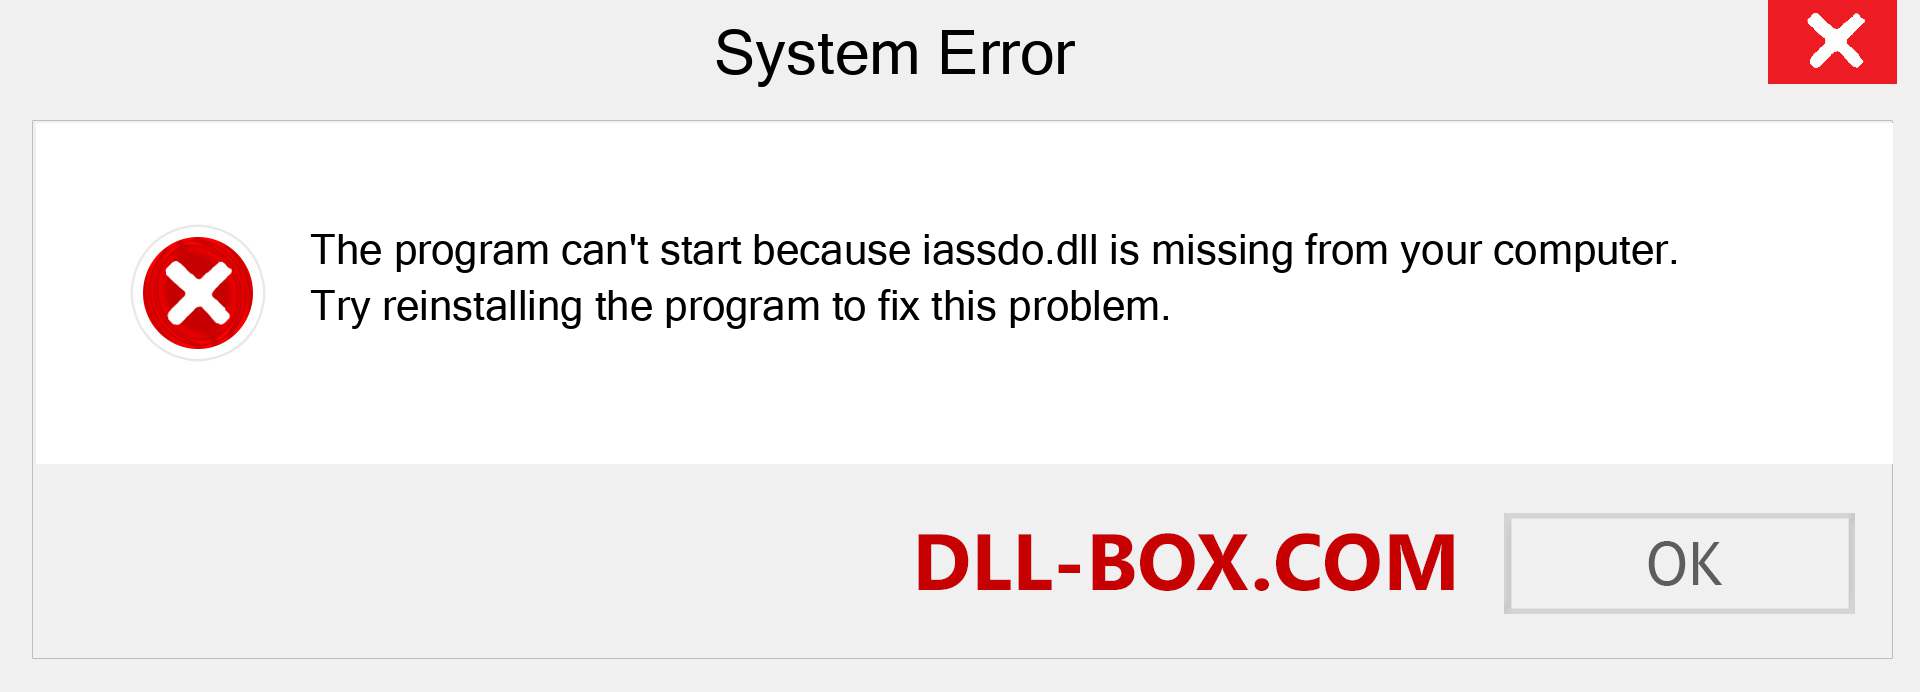  iassdo.dll file is missing?. Download for Windows 7, 8, 10 - Fix  iassdo dll Missing Error on Windows, photos, images